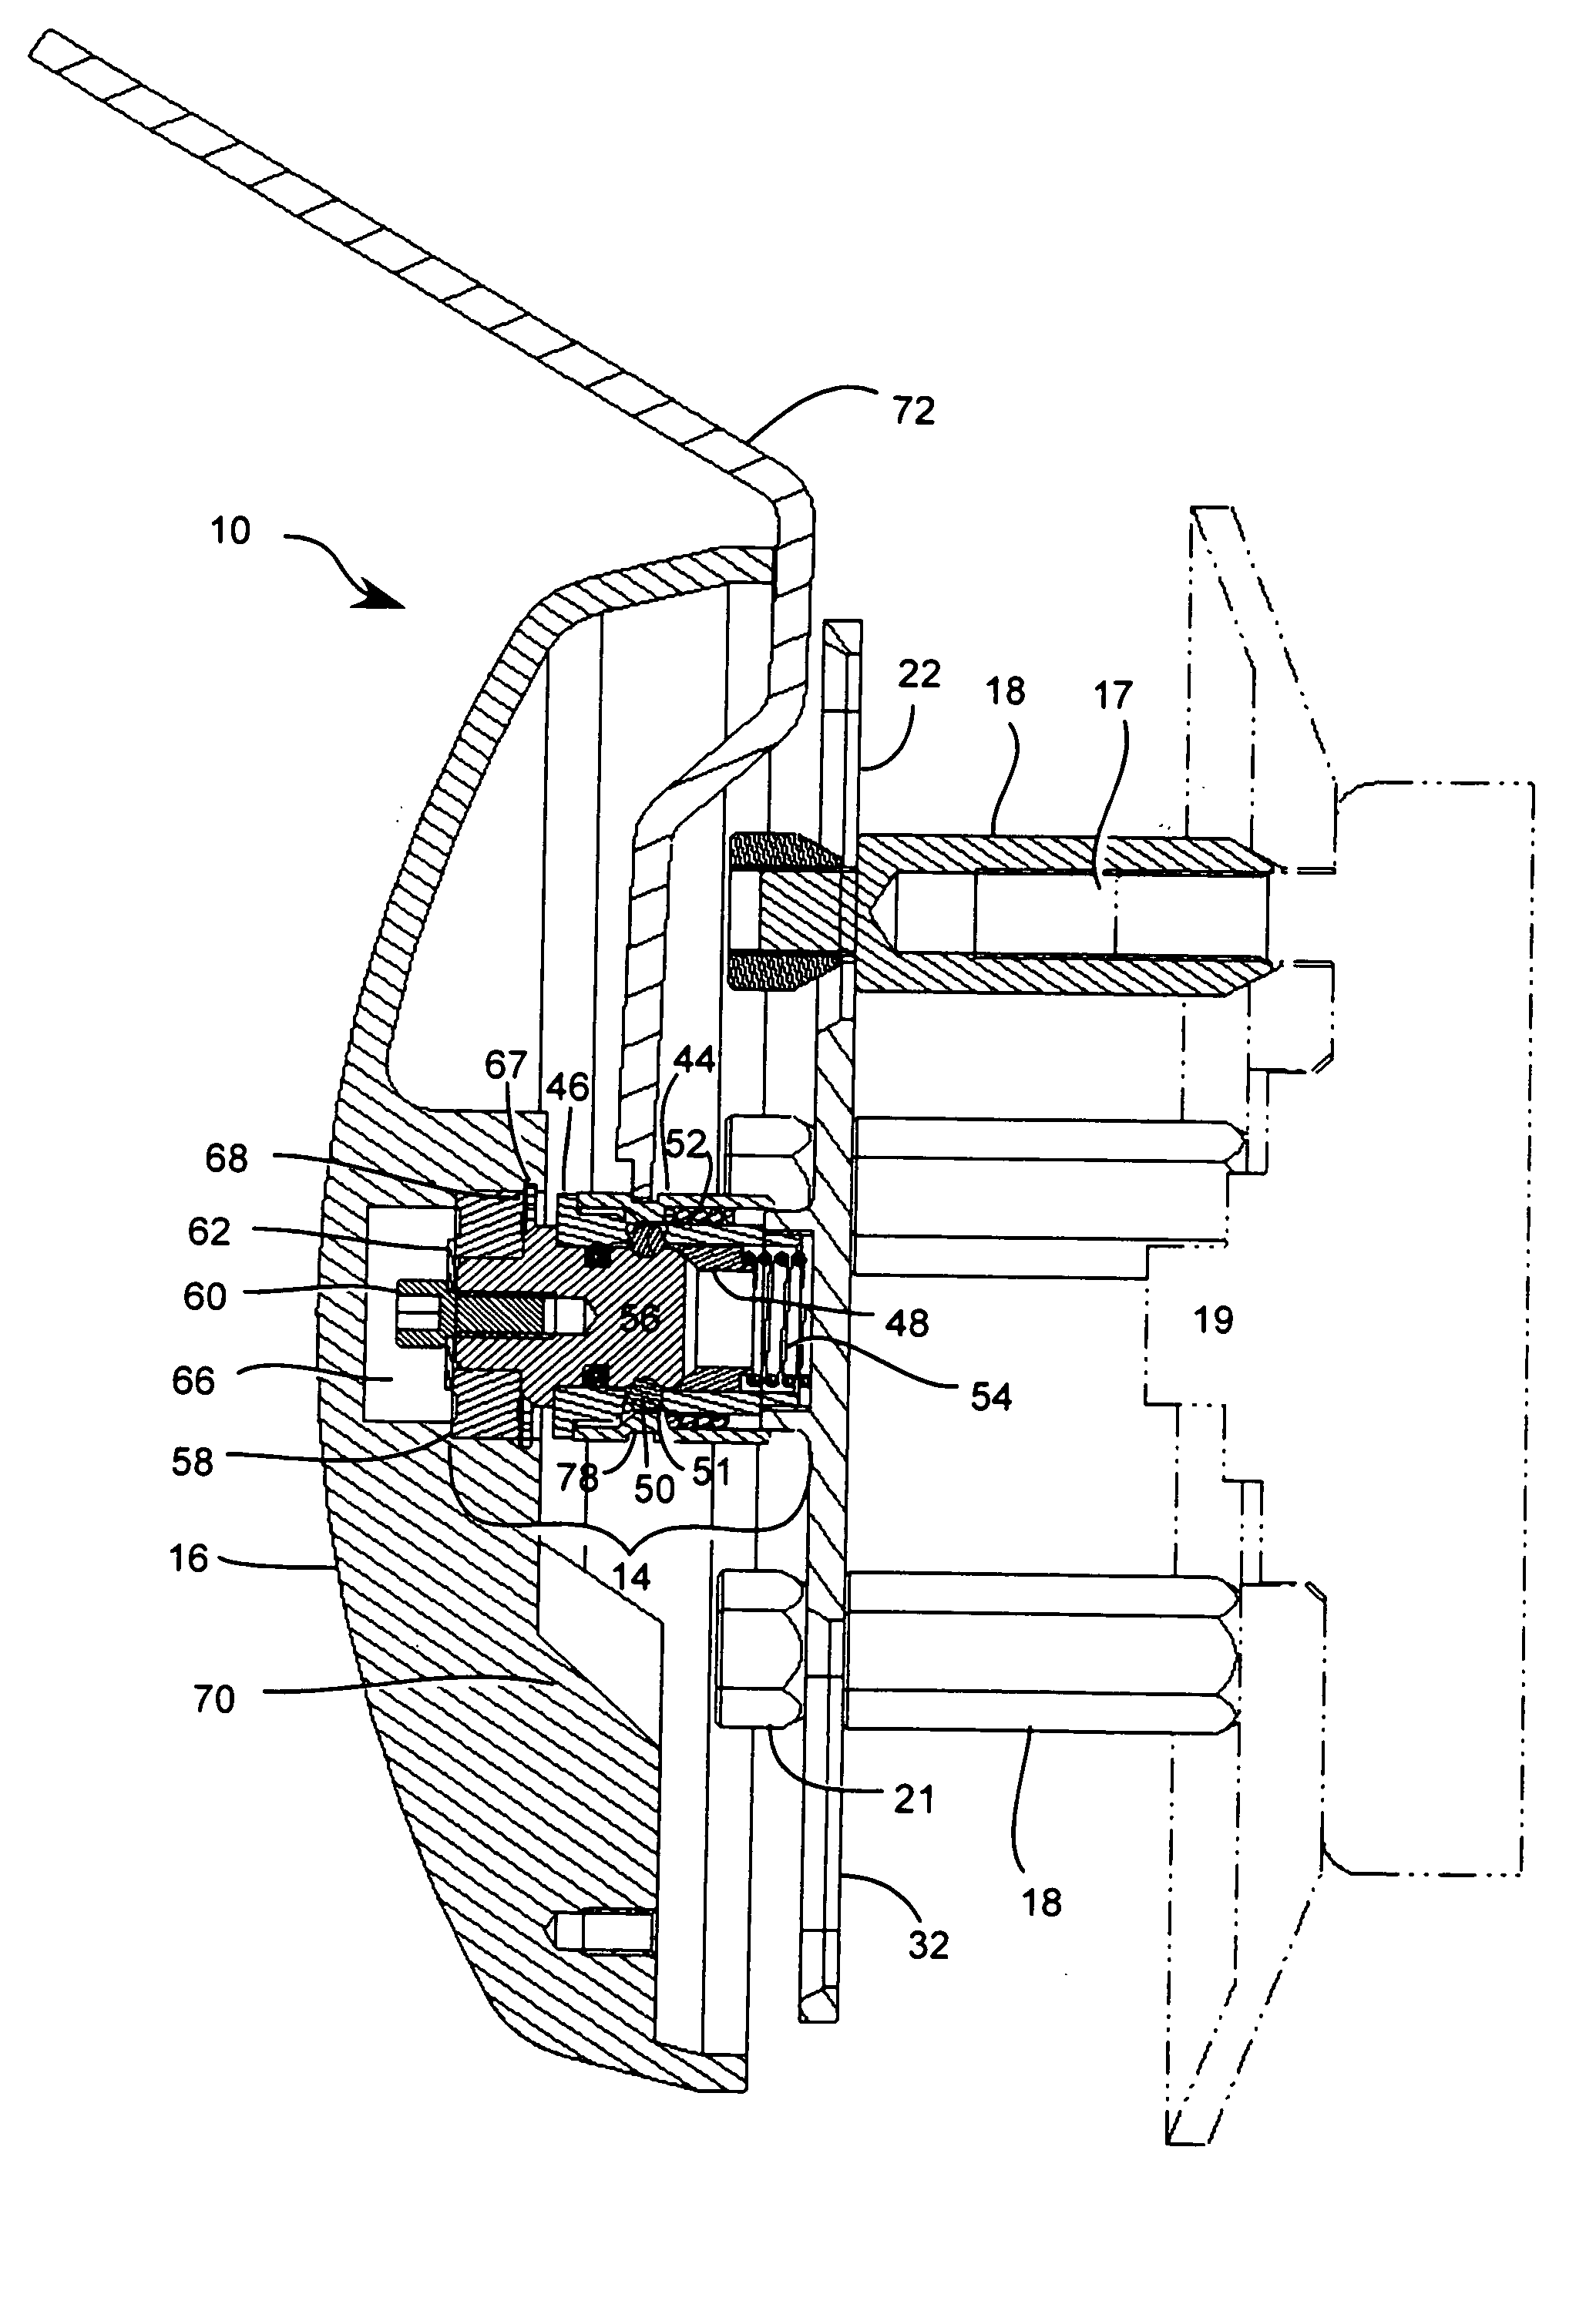 Wheel cover apparatus and associated methods